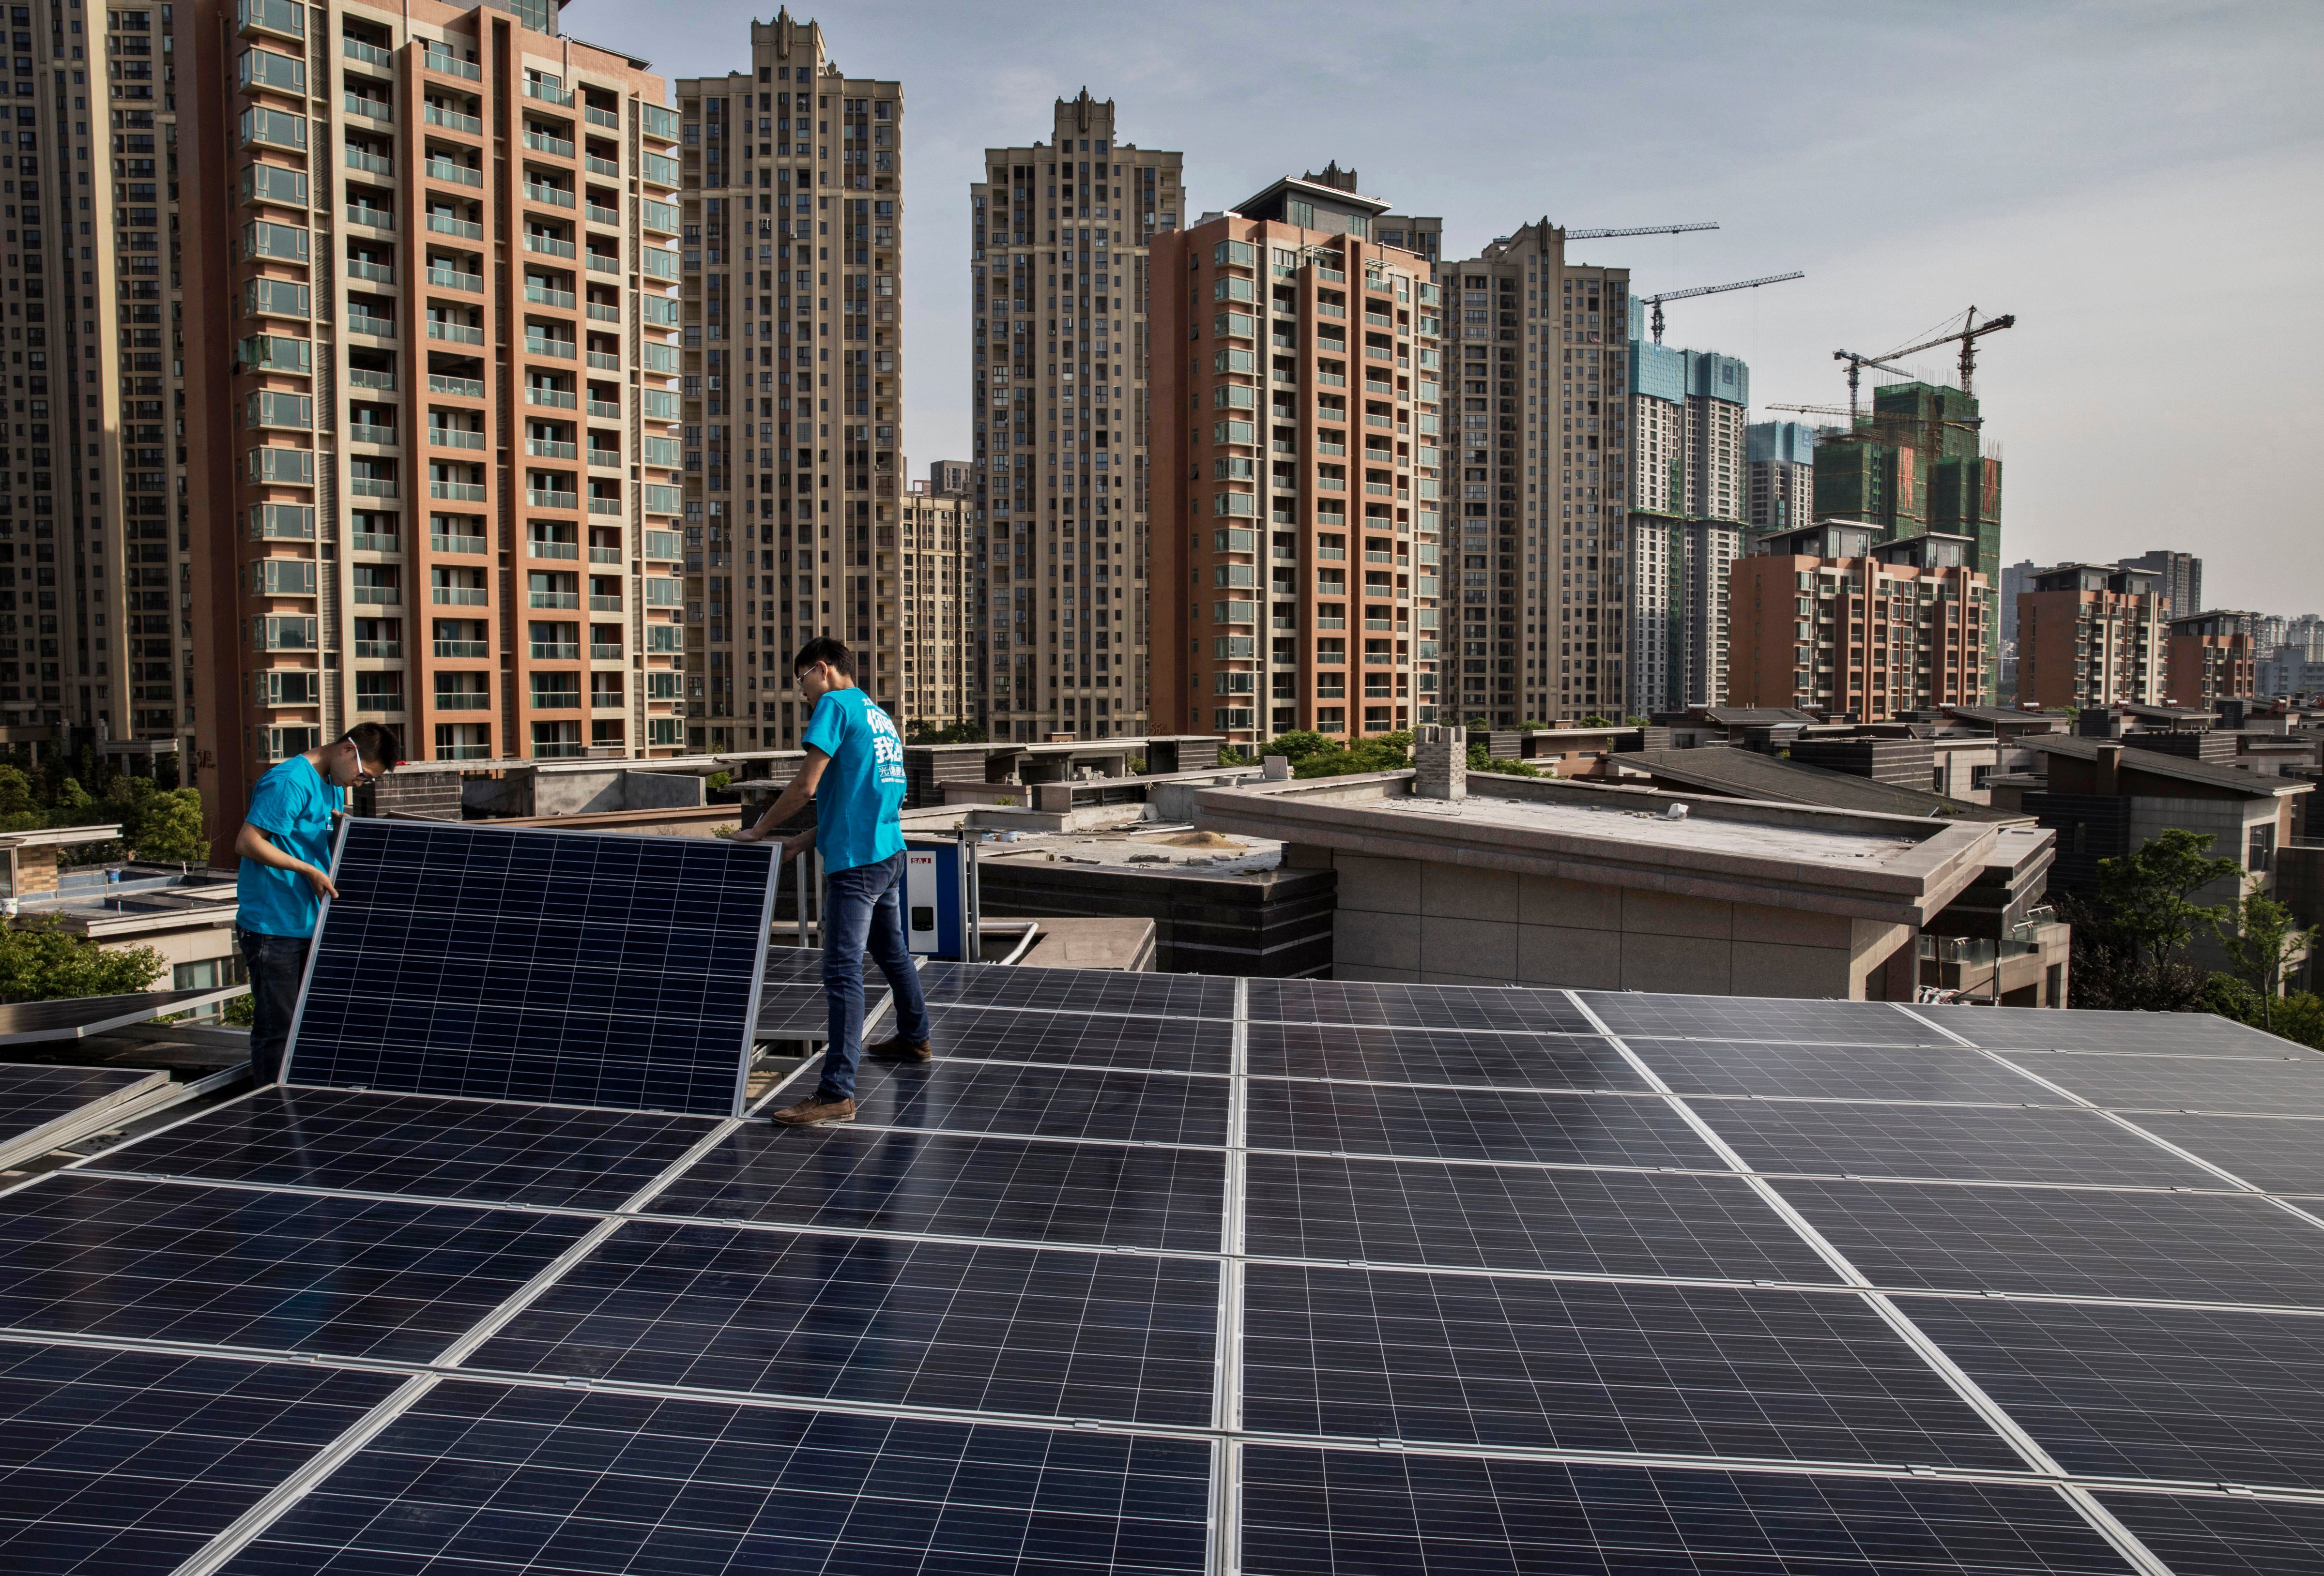 Chinese workers from Wuhan Guangsheng Photovoltaic Company install solar panels on the roof of a building on April 27 in Wuhan, China. (Kevin Frayer—Getty Images)